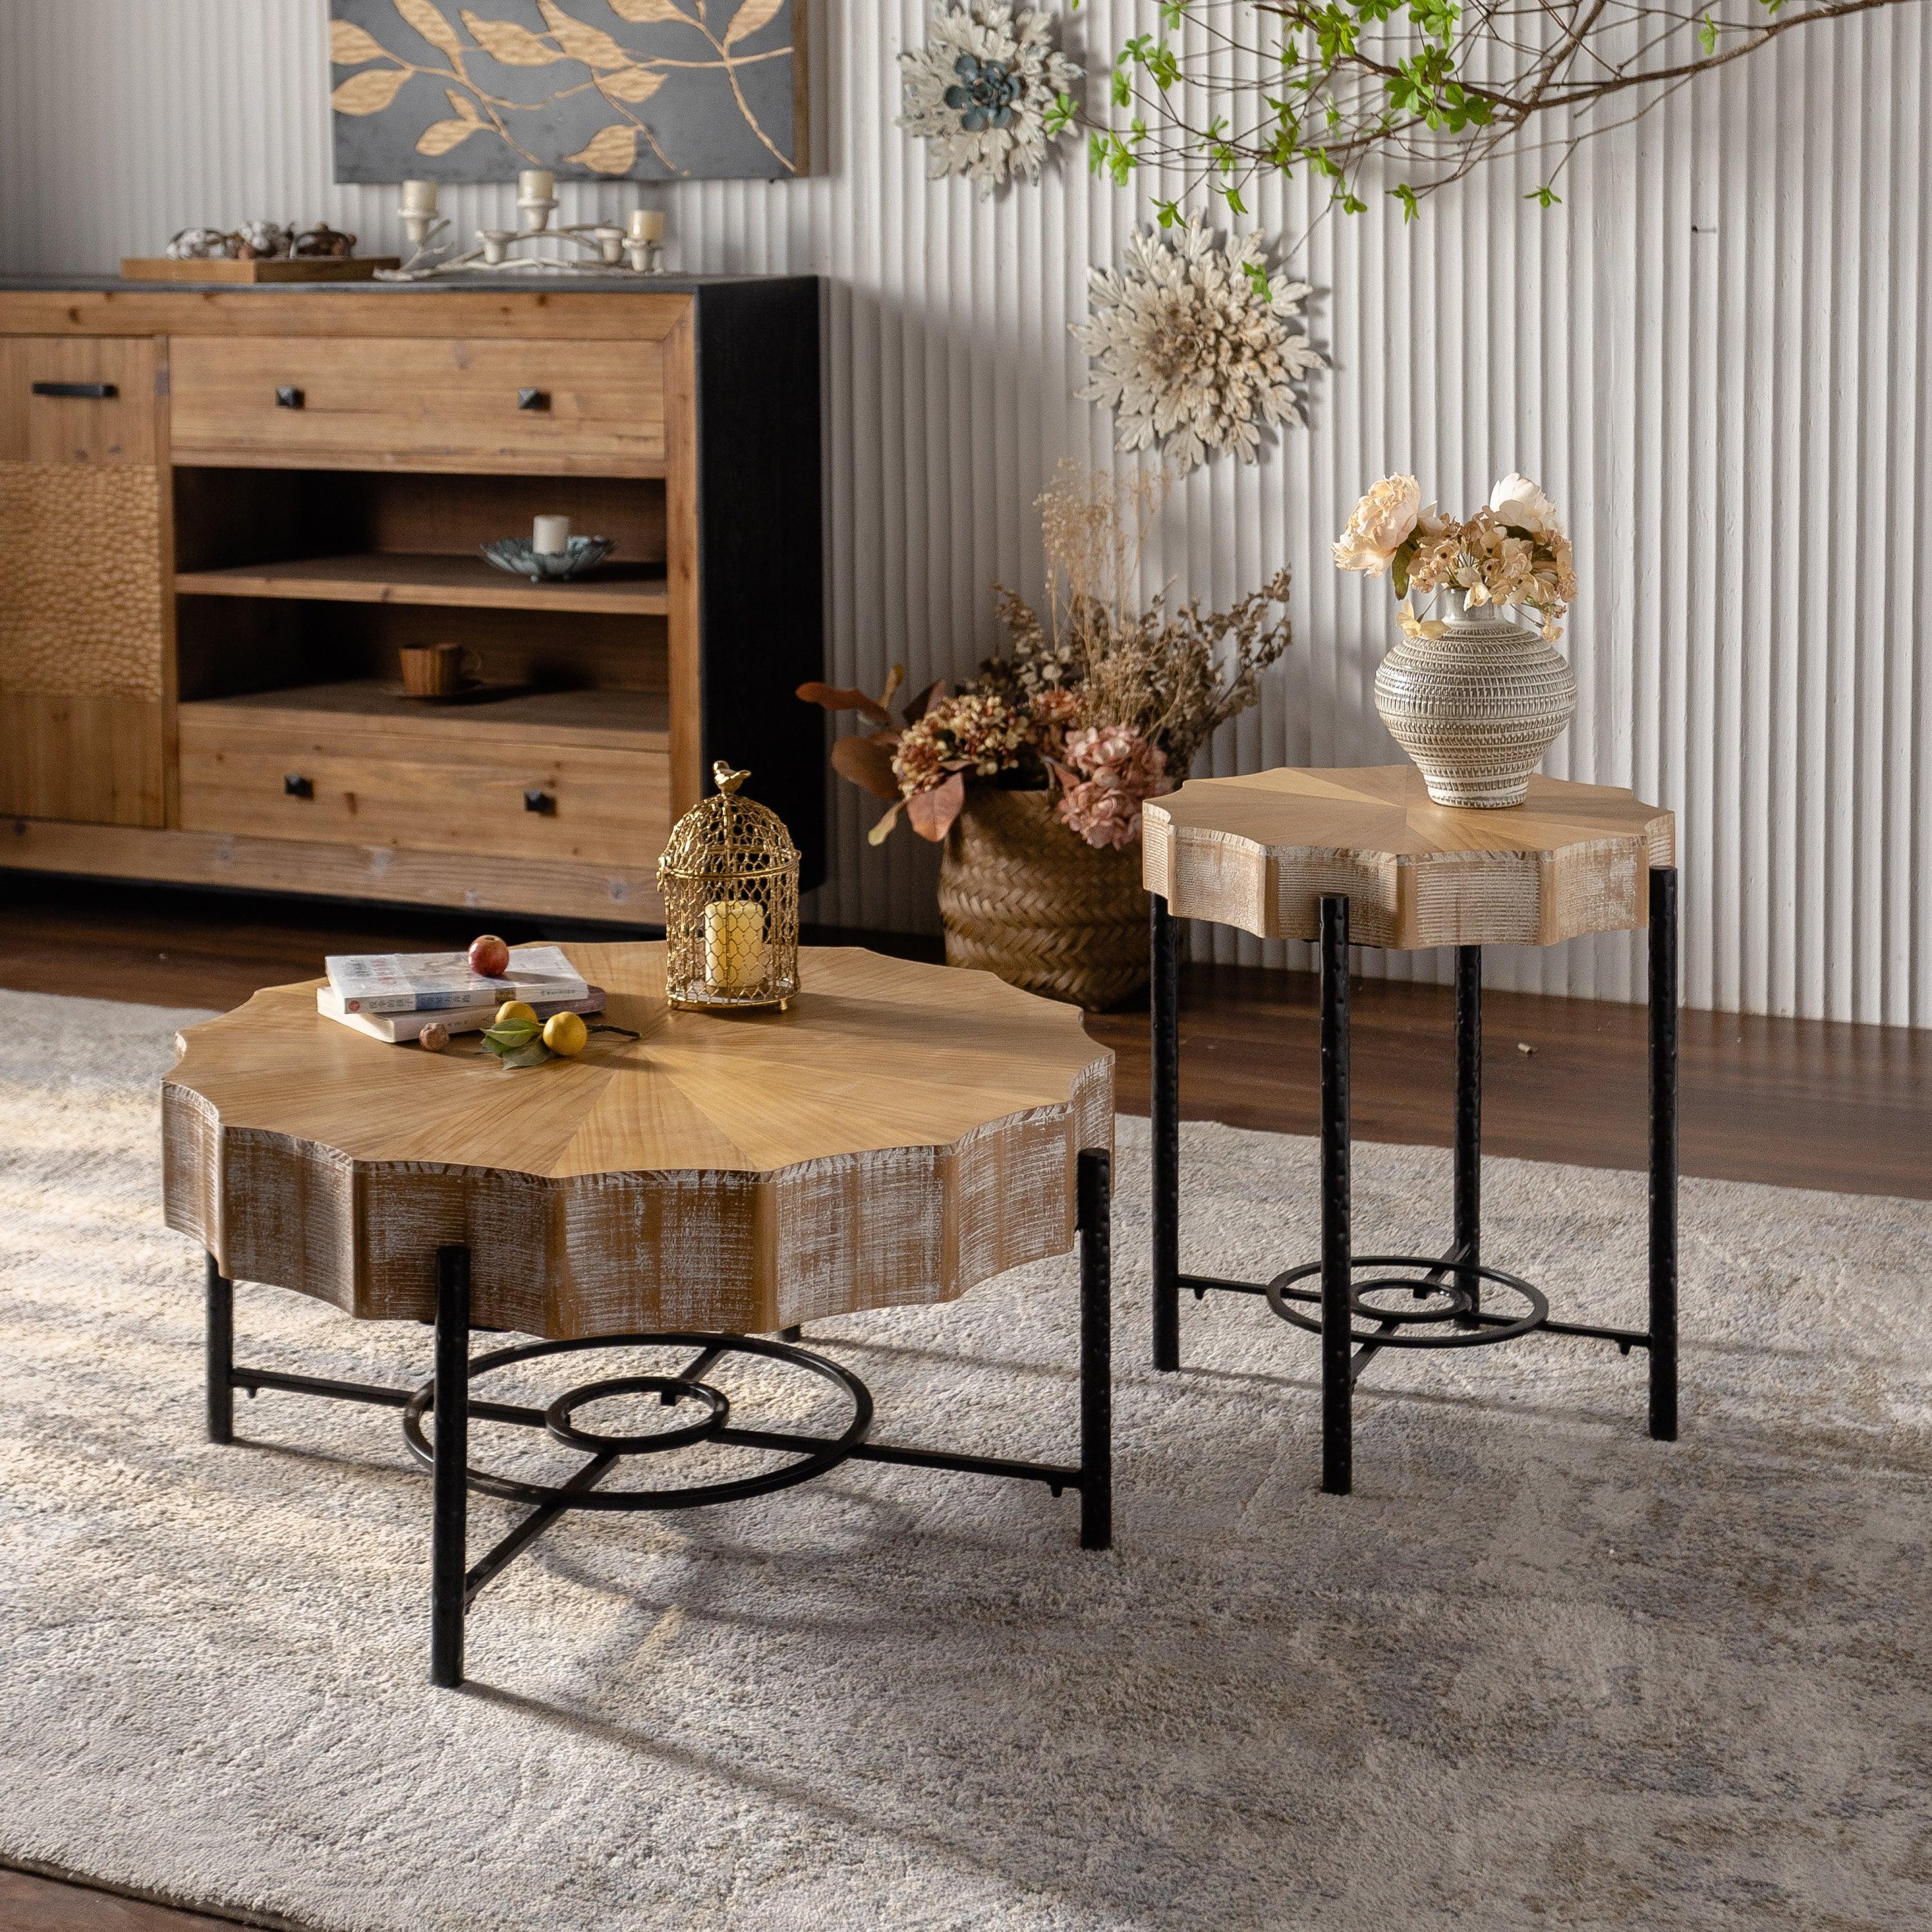 🆓🚛 31.5 "Vintage Patchwork Lace Shape Coffee Table With Natural Pine Grain Table Top & Dimpled Metal Cross Legs, Set of 2